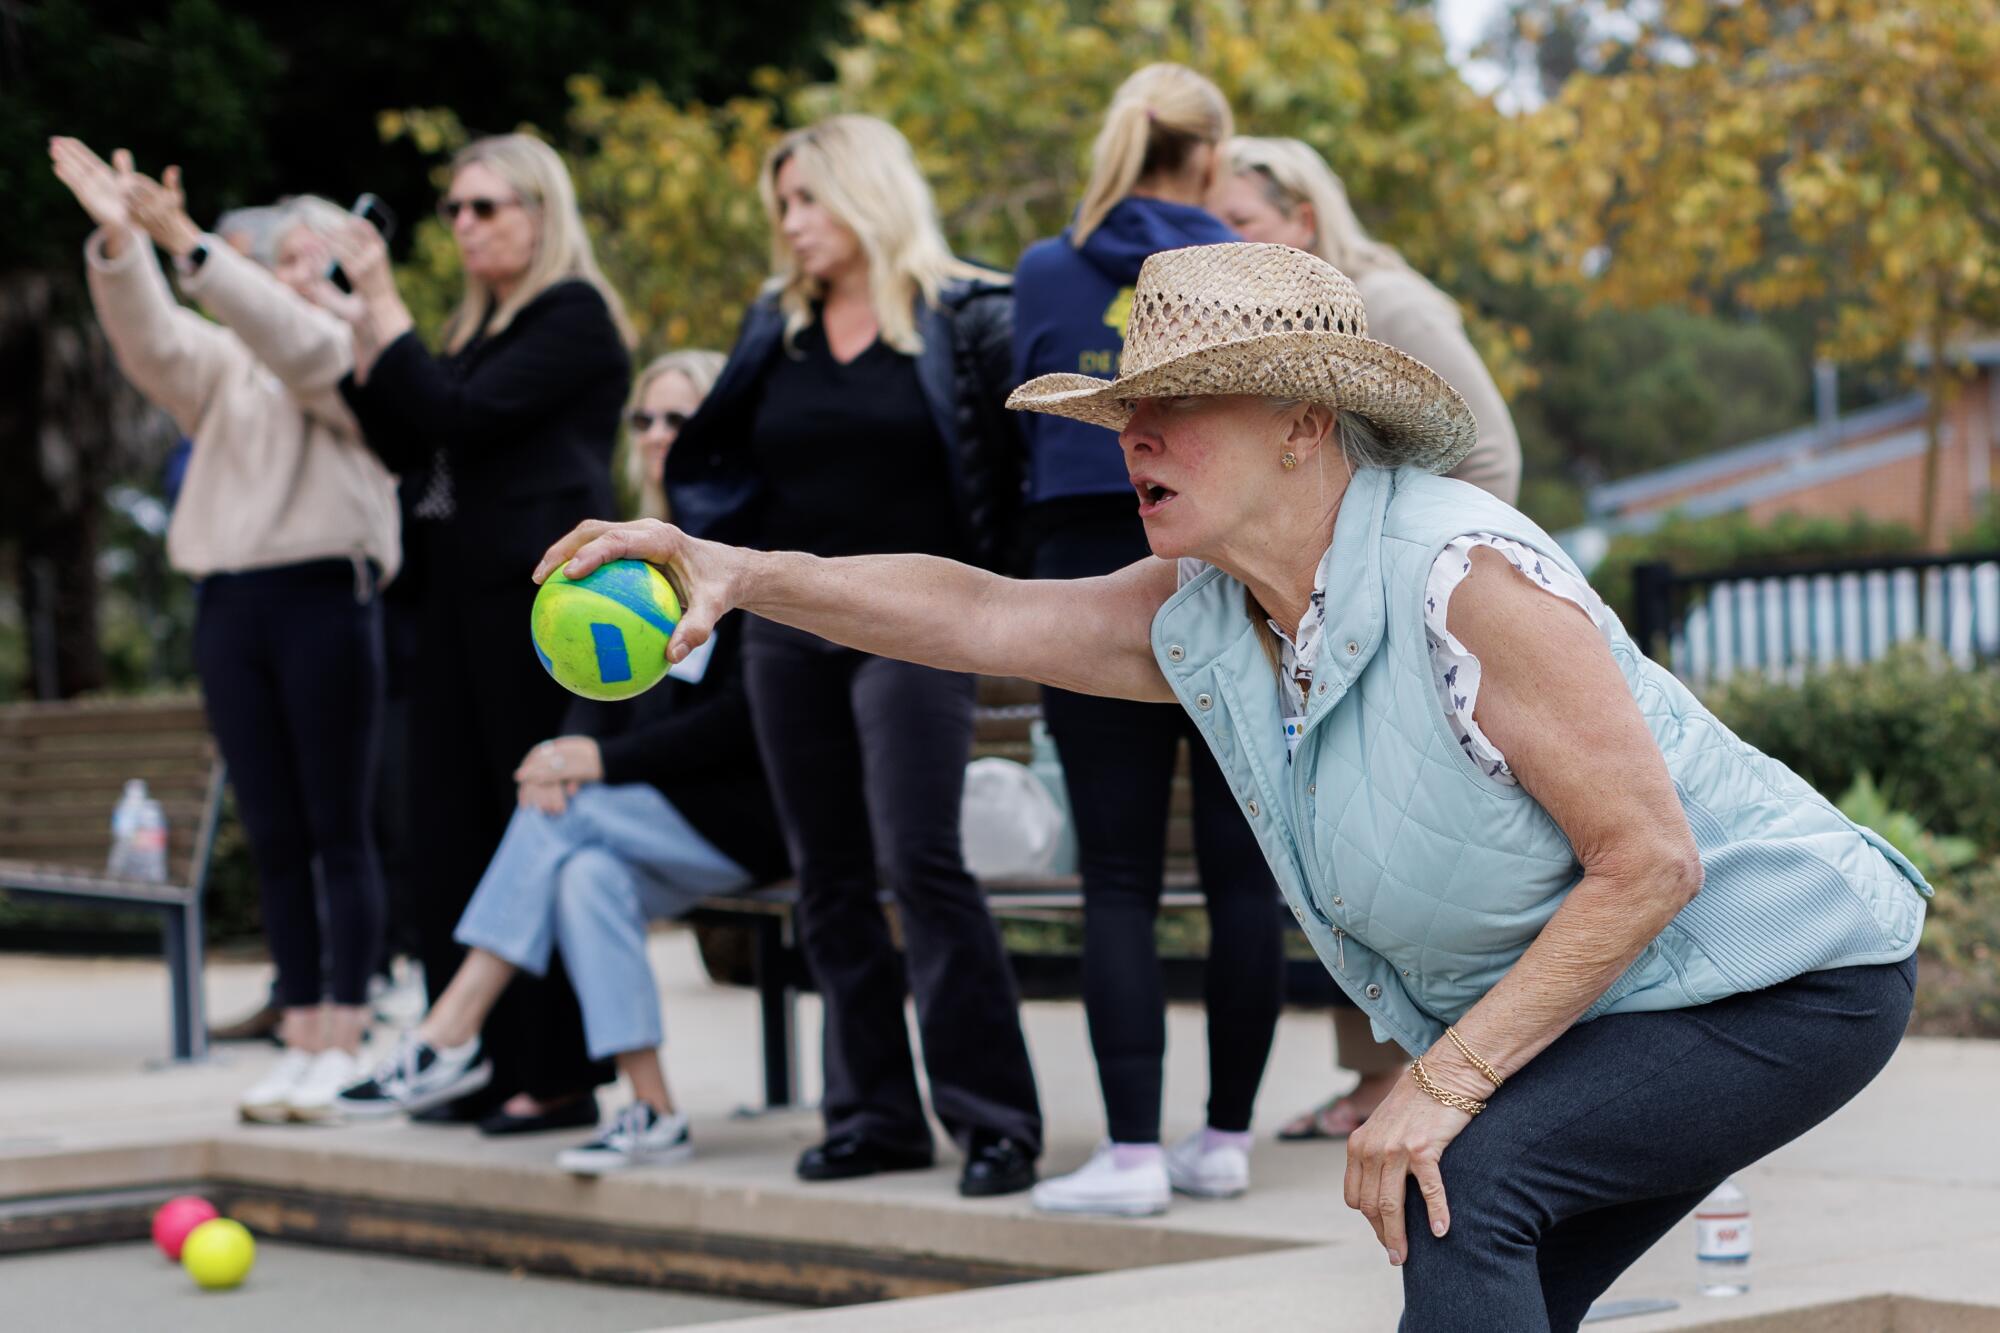 A woman throwing a bocce ball.